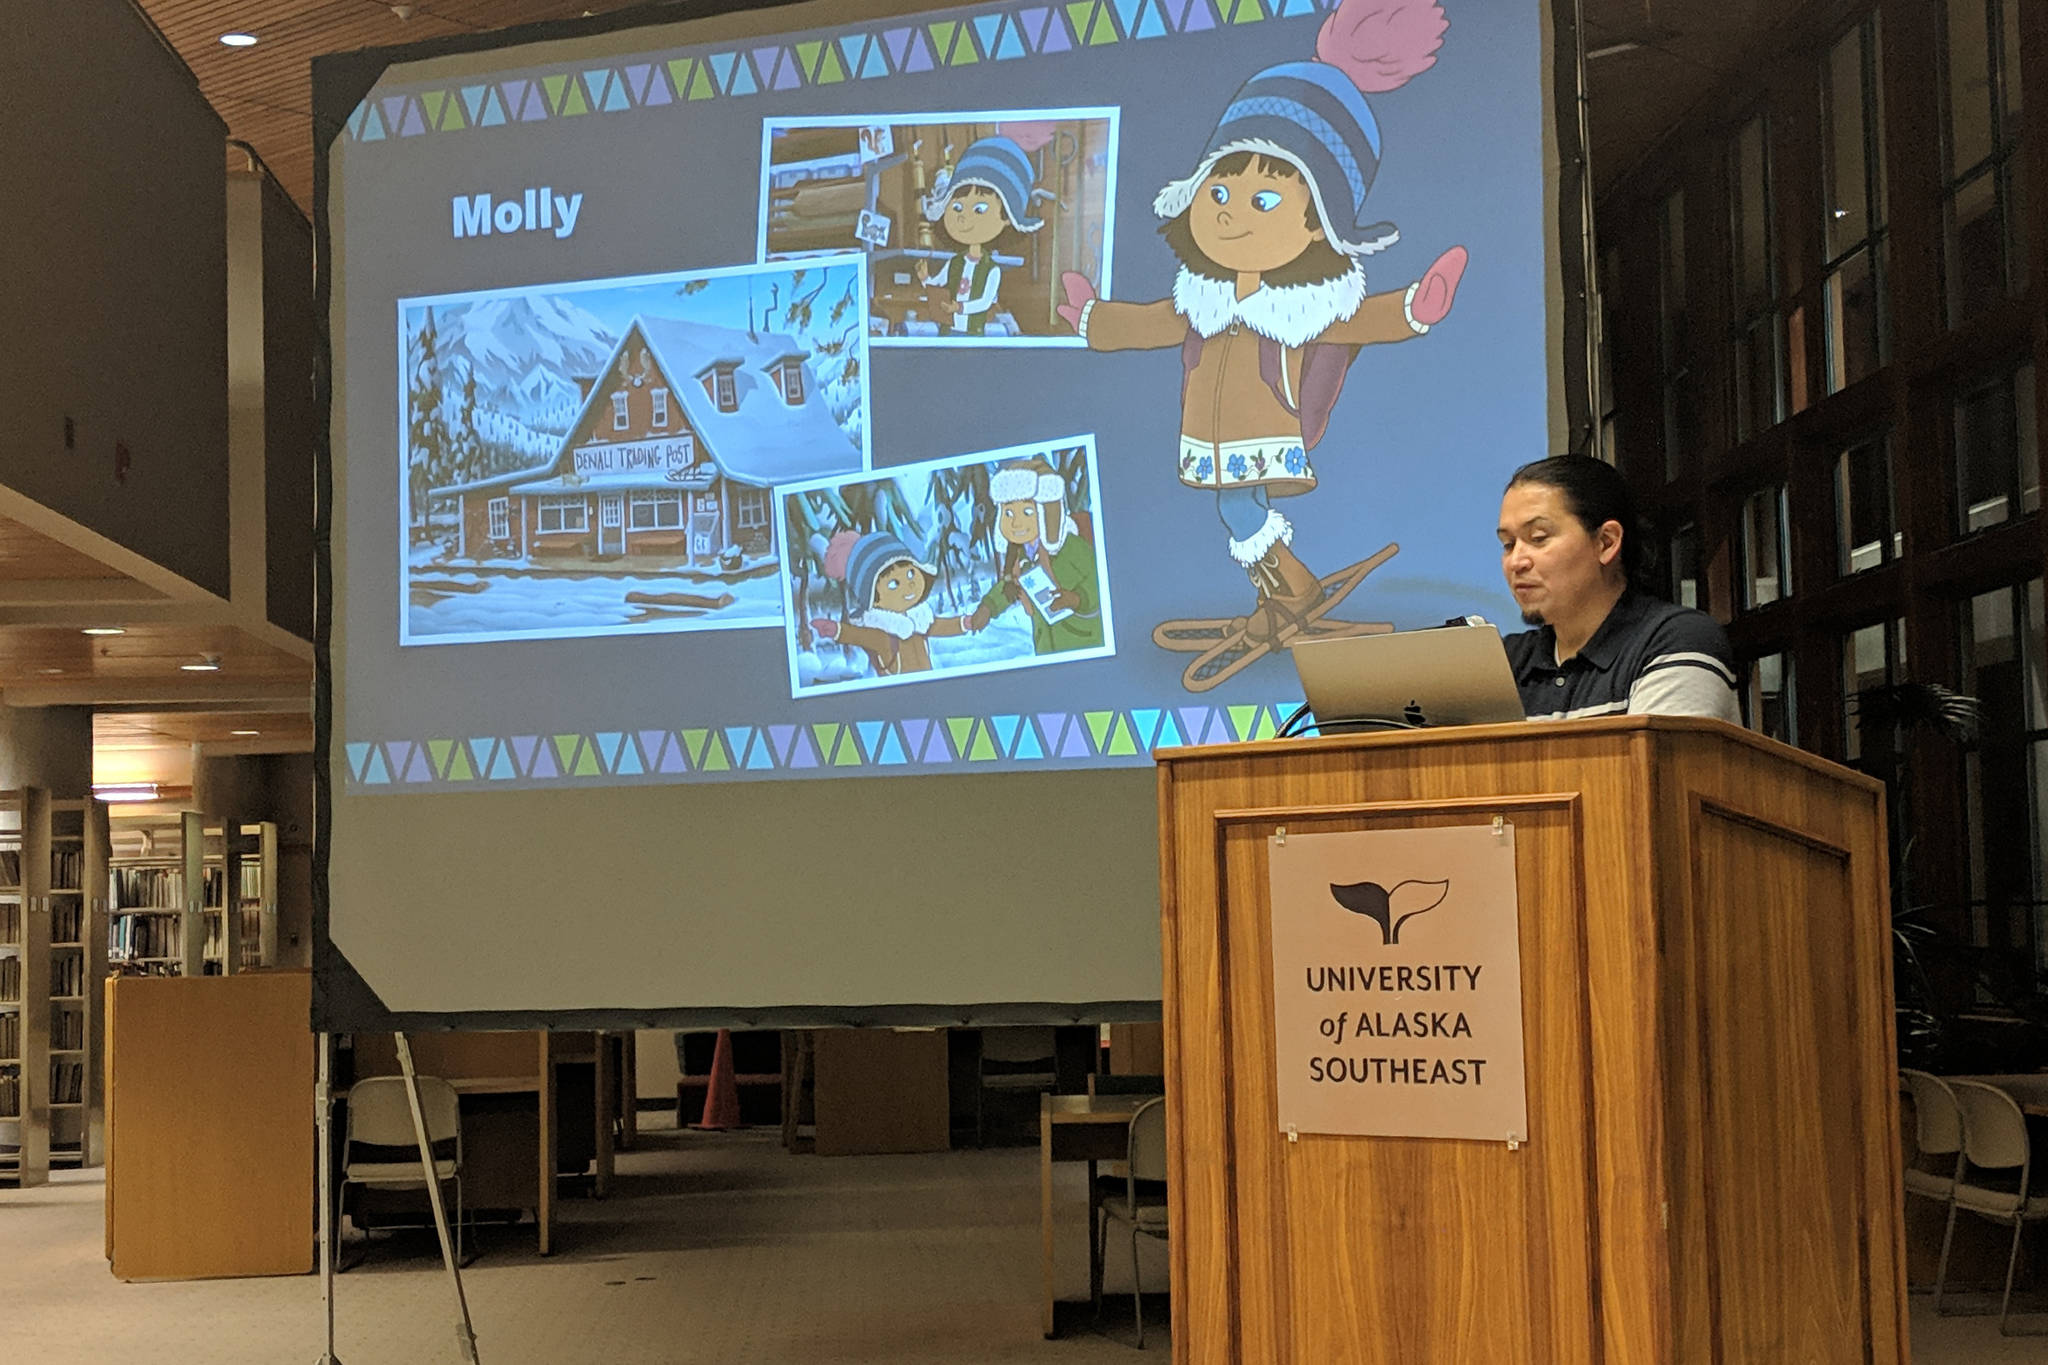 University of Alaska Southeast professor <span style="text-decoration: underline;">X</span>’unei Lance Twitchell filled in for the Evening at Egan presentation about “Molly of Denali” Friday, Nov. 30. Twitchell has had a hand in the program expected to premiere in the summer of 2019 as a consultant and writer. (Ben Hohenstatt | Capital City Weekly)